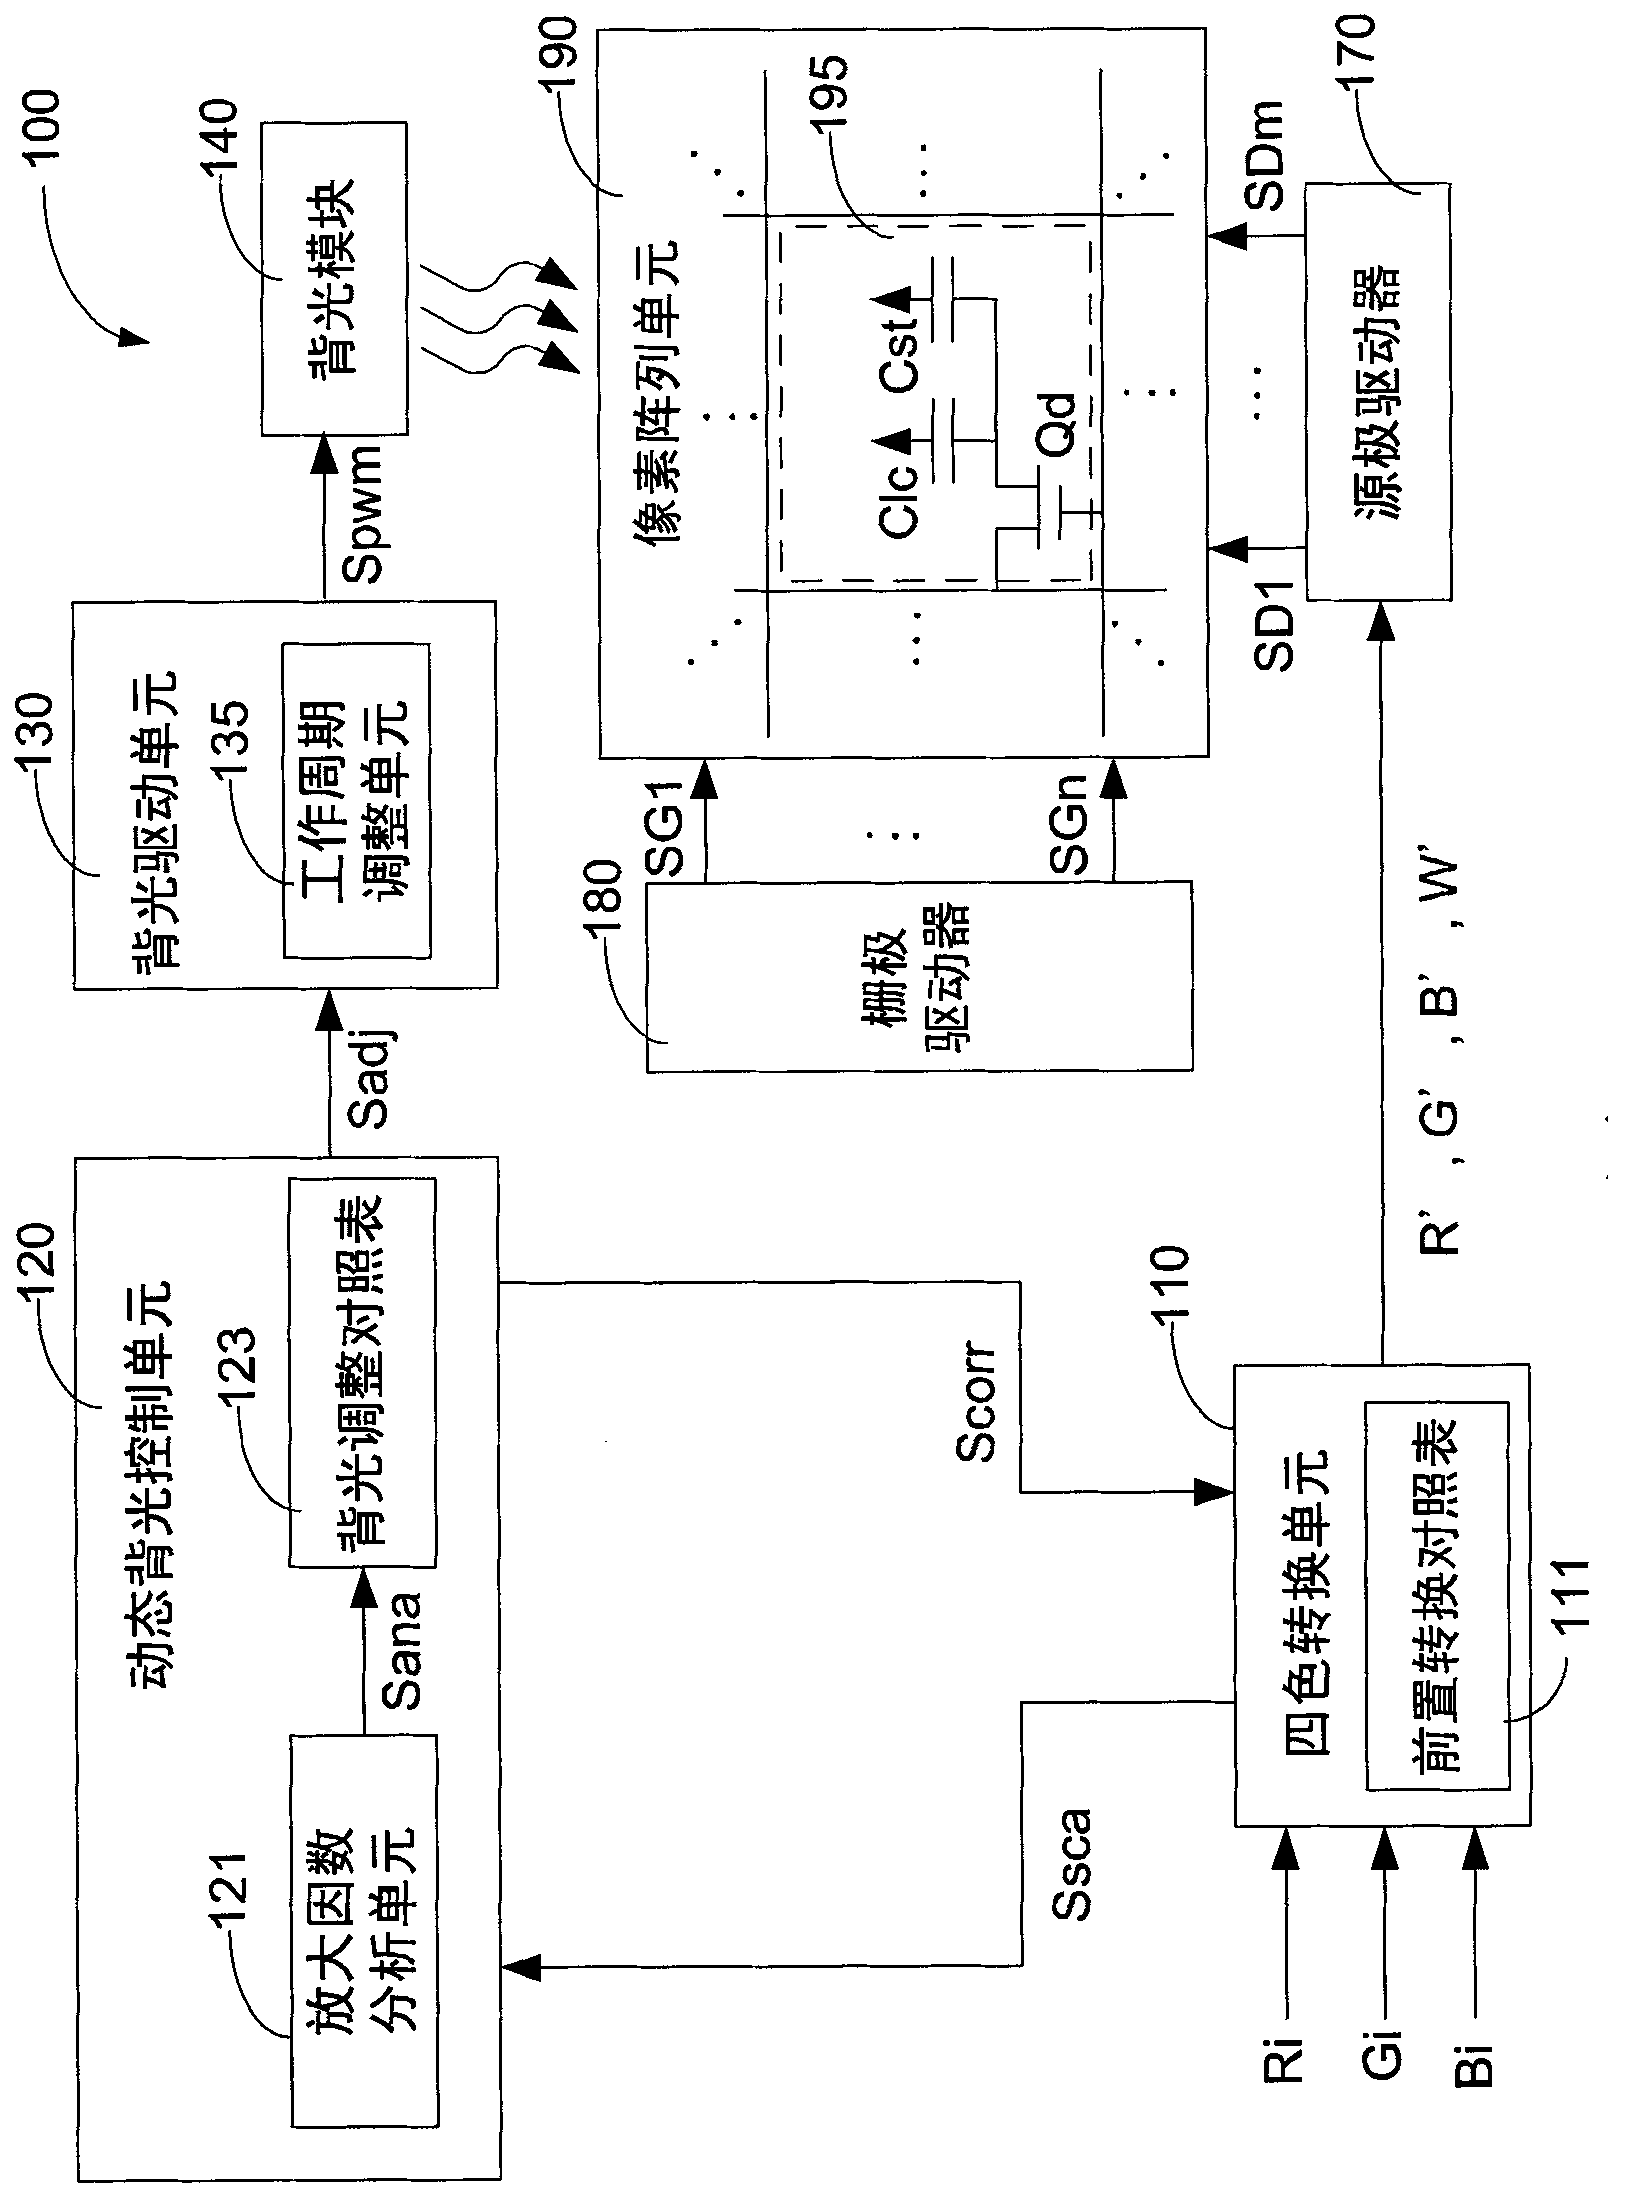 Red-green-blue-white display device and control method